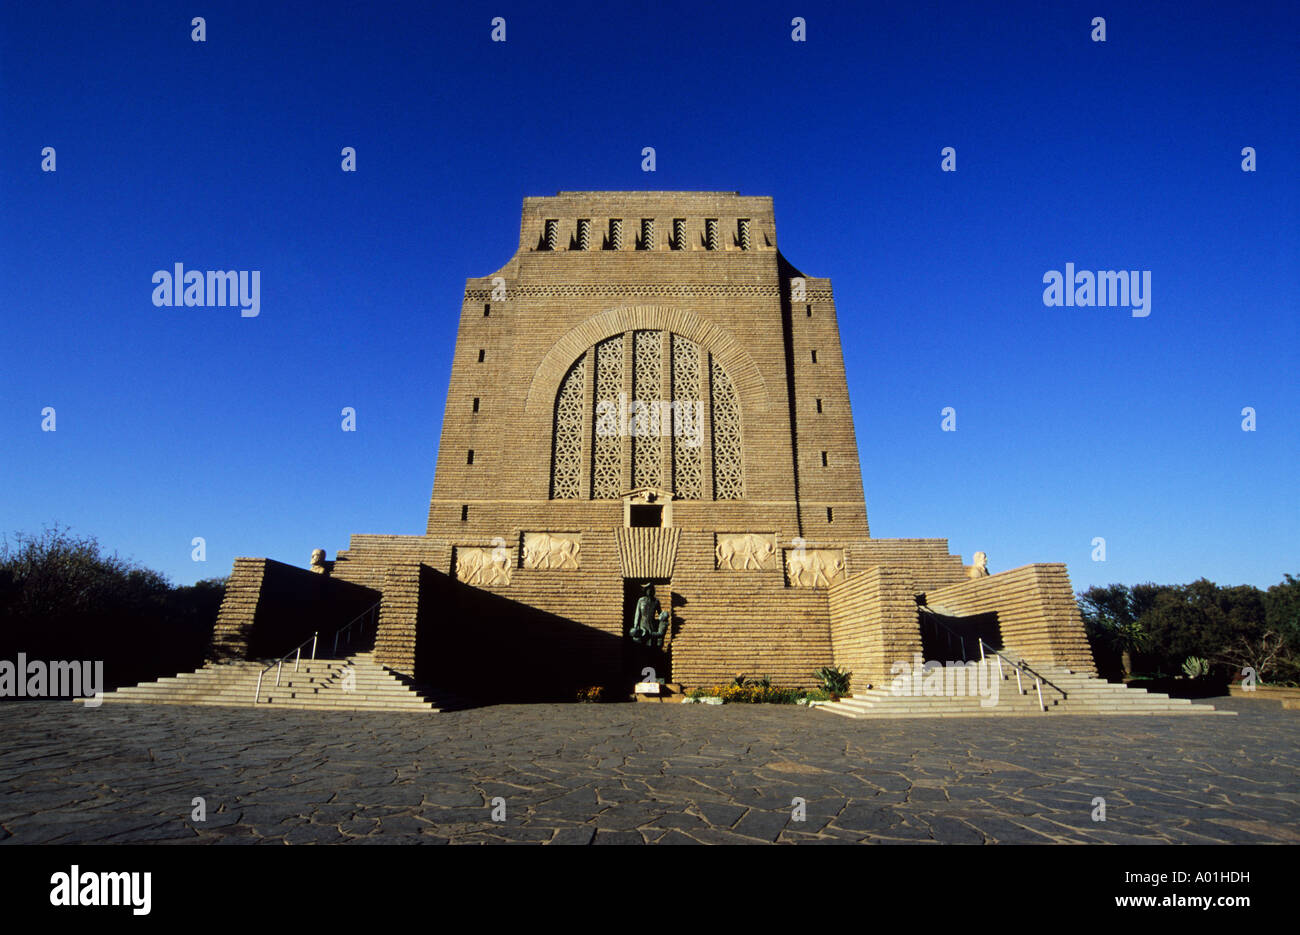 Cultures, Afrikaner people, Voortrekker Monument building, Pretoria, South Africa, pioneers of mass land migration, 1830s, historical event, ethnic Stock Photo